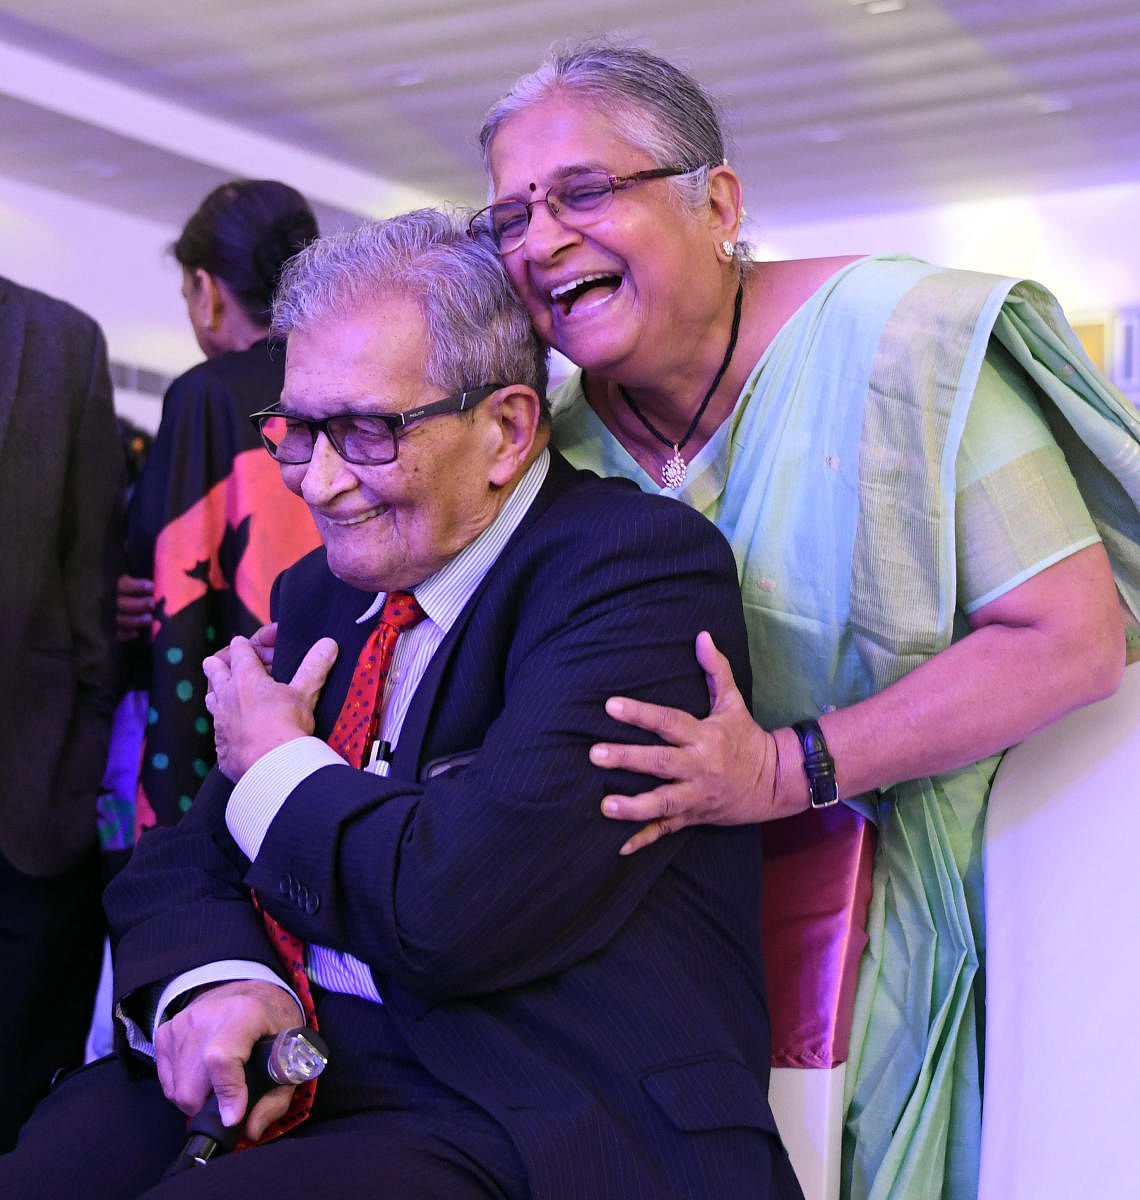 Sudha Murty, chairperson of Infosys Foundation, greets Nobel laureate Amartya Sen during the awards ceremony on Tuesday. DH Photo/Pushkar V